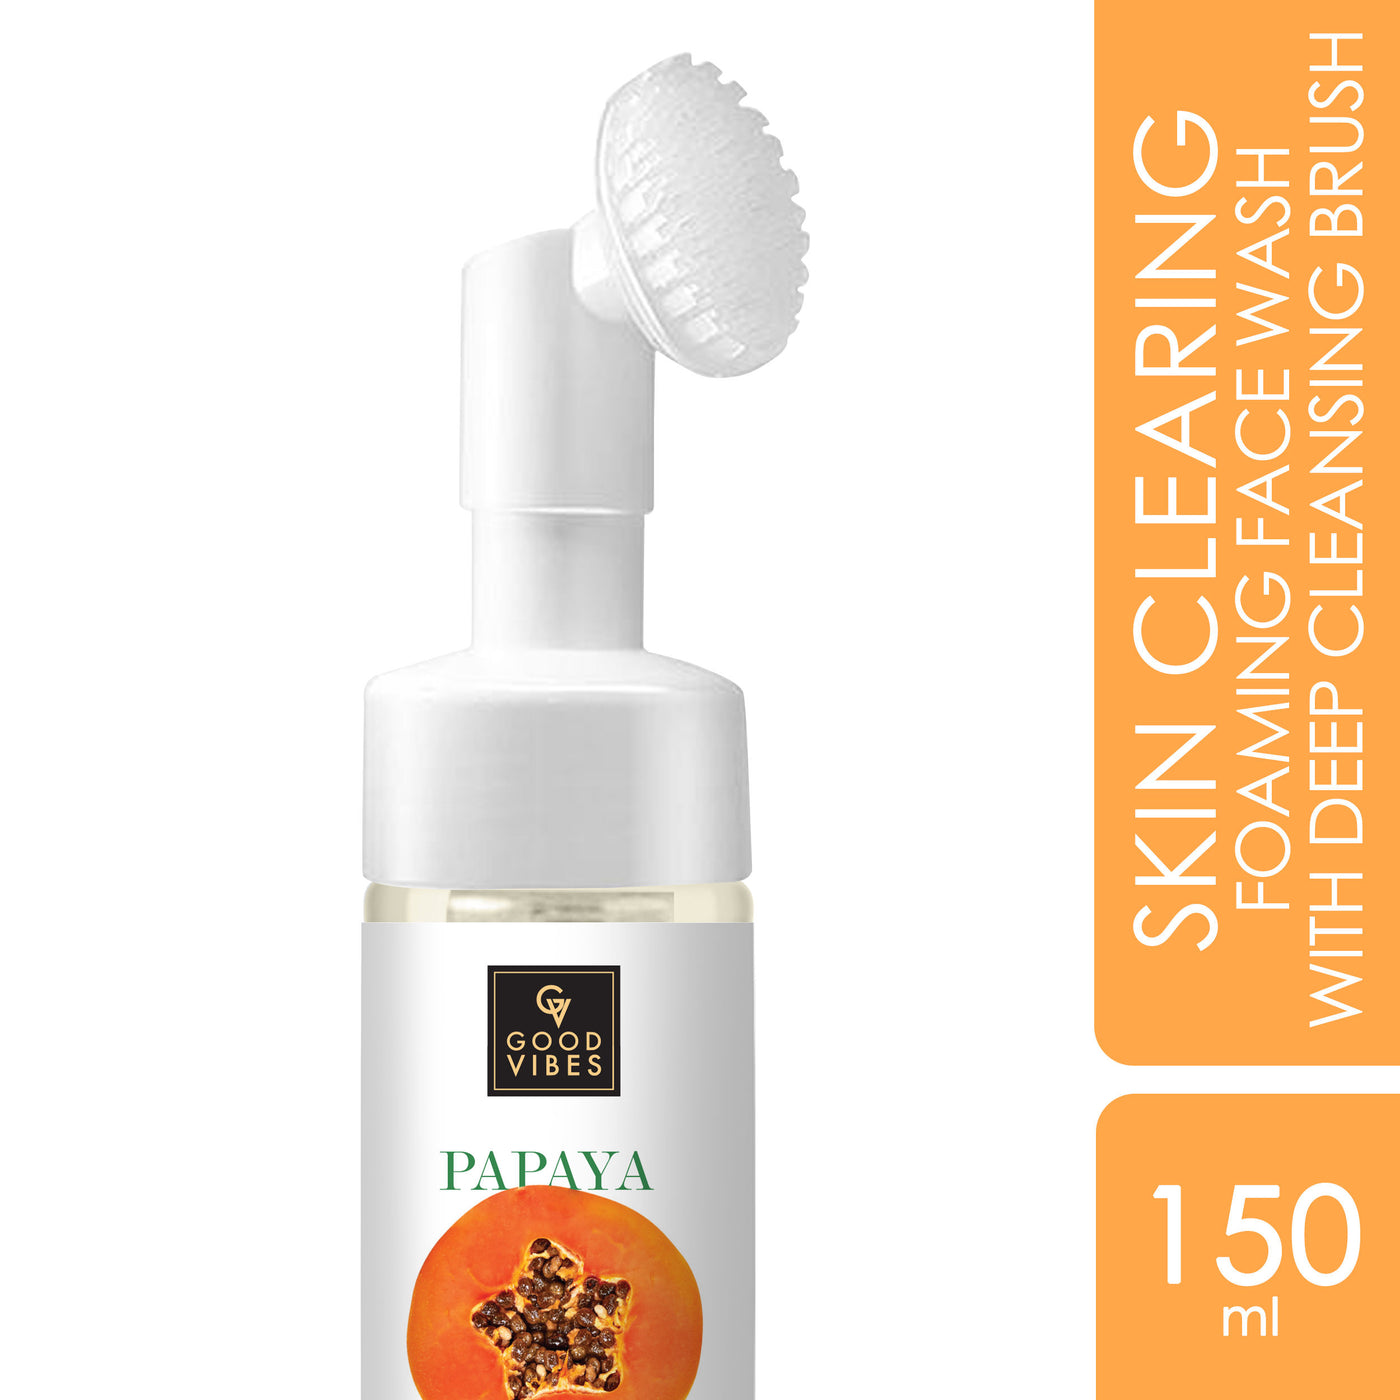 good-vibes-papaya-skin-clearing-foaming-face-wash-with-deep-cleansing-brush-150-ml-1